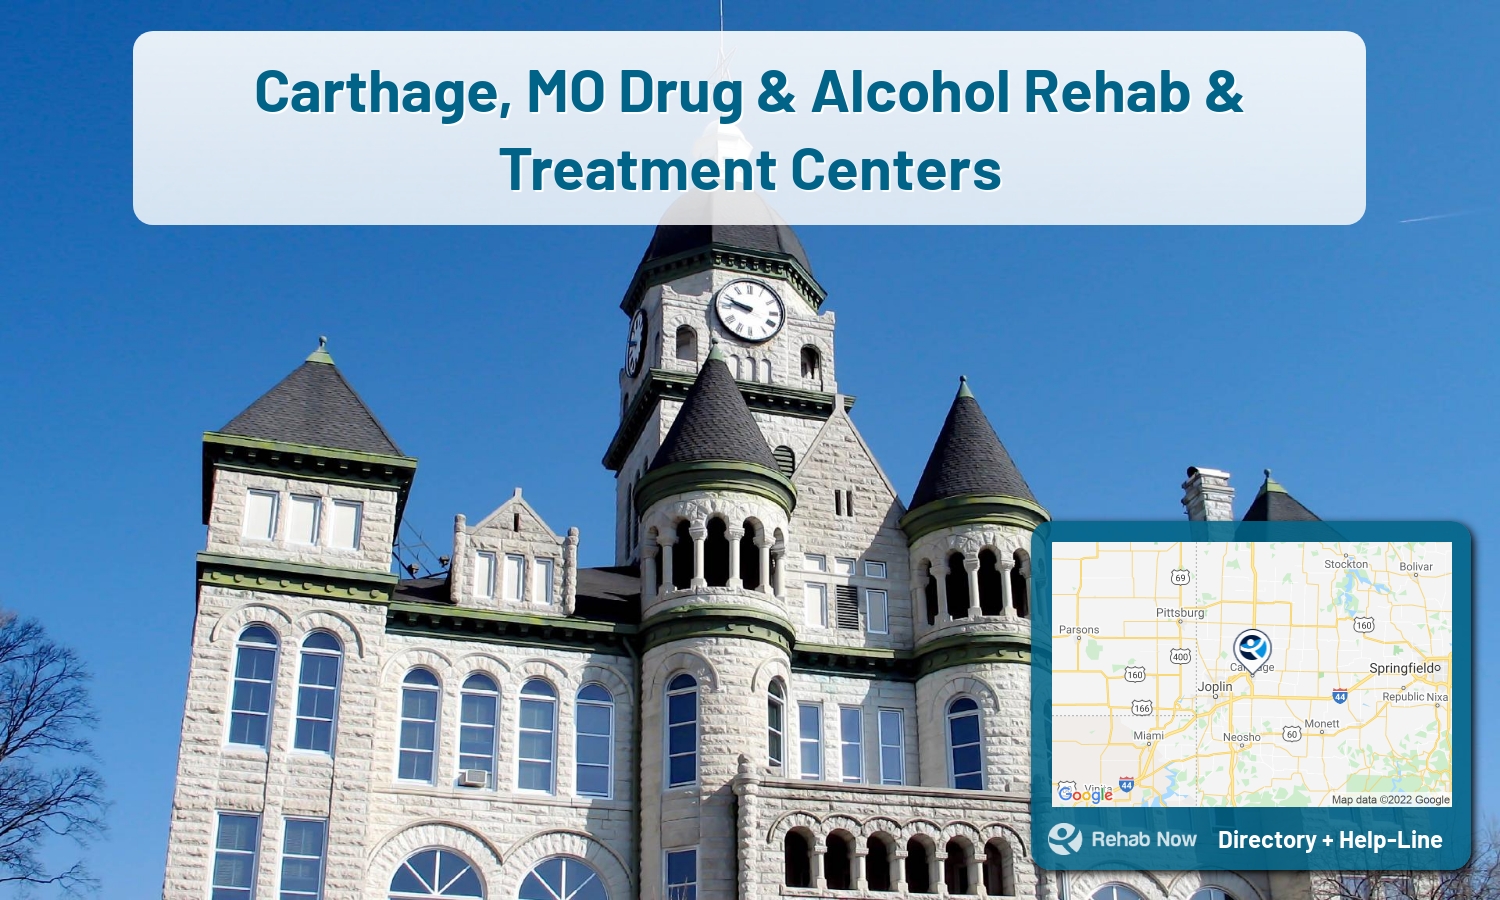 Our experts can help you find treatment now in Carthage, Missouri. We list drug rehab and alcohol centers in Missouri.